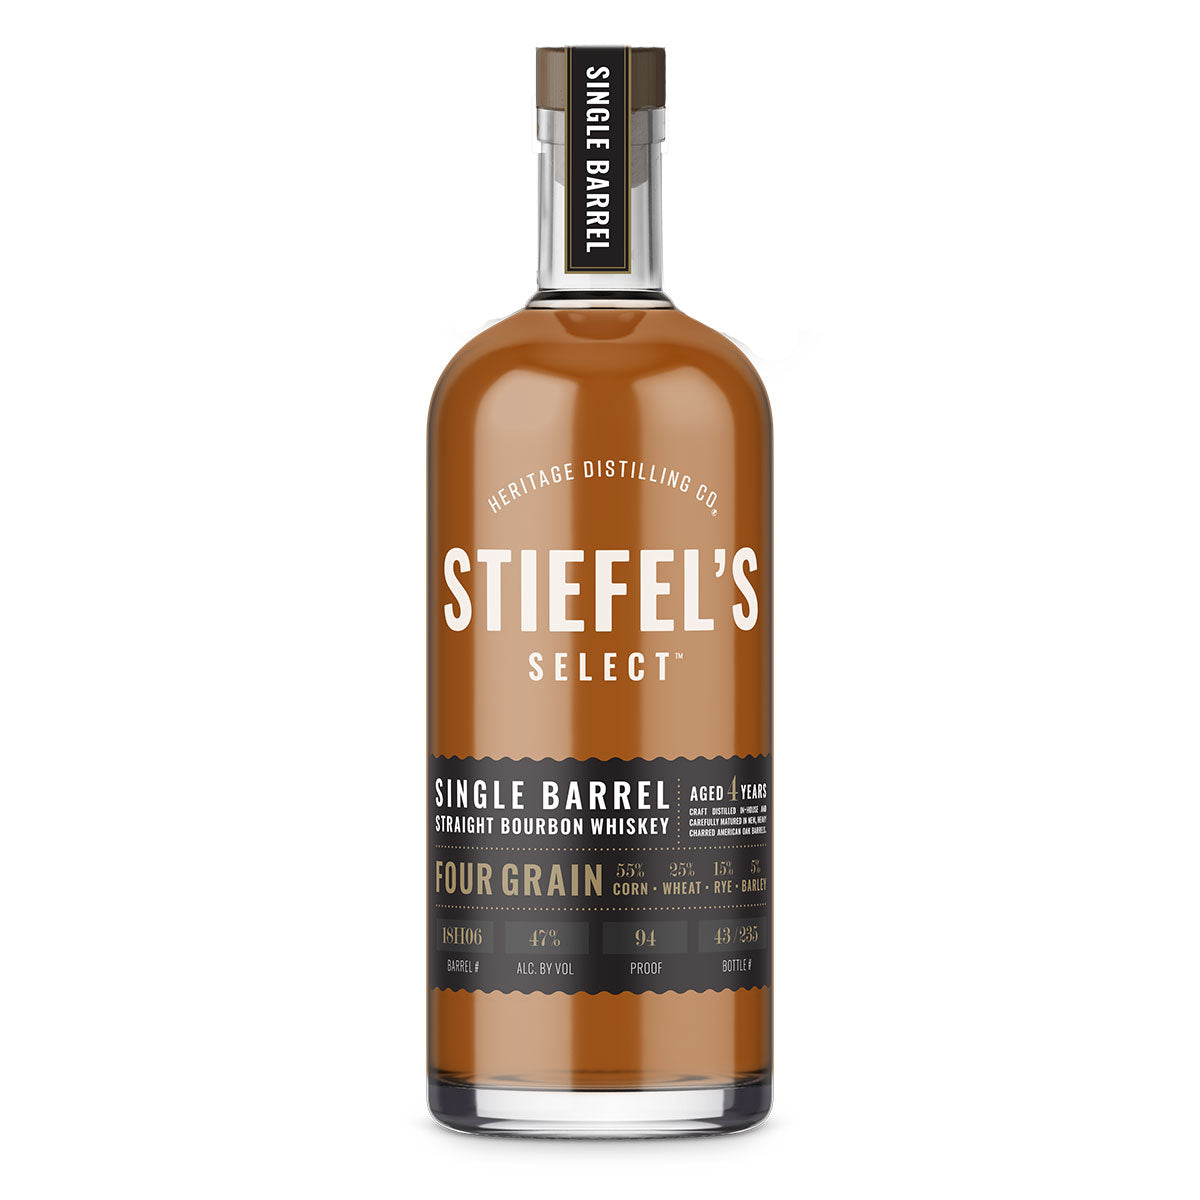 A 2D rendering of a filled whiskey bottle "Stiefel's Select Single Barrel Four Grain Bourbon" against white